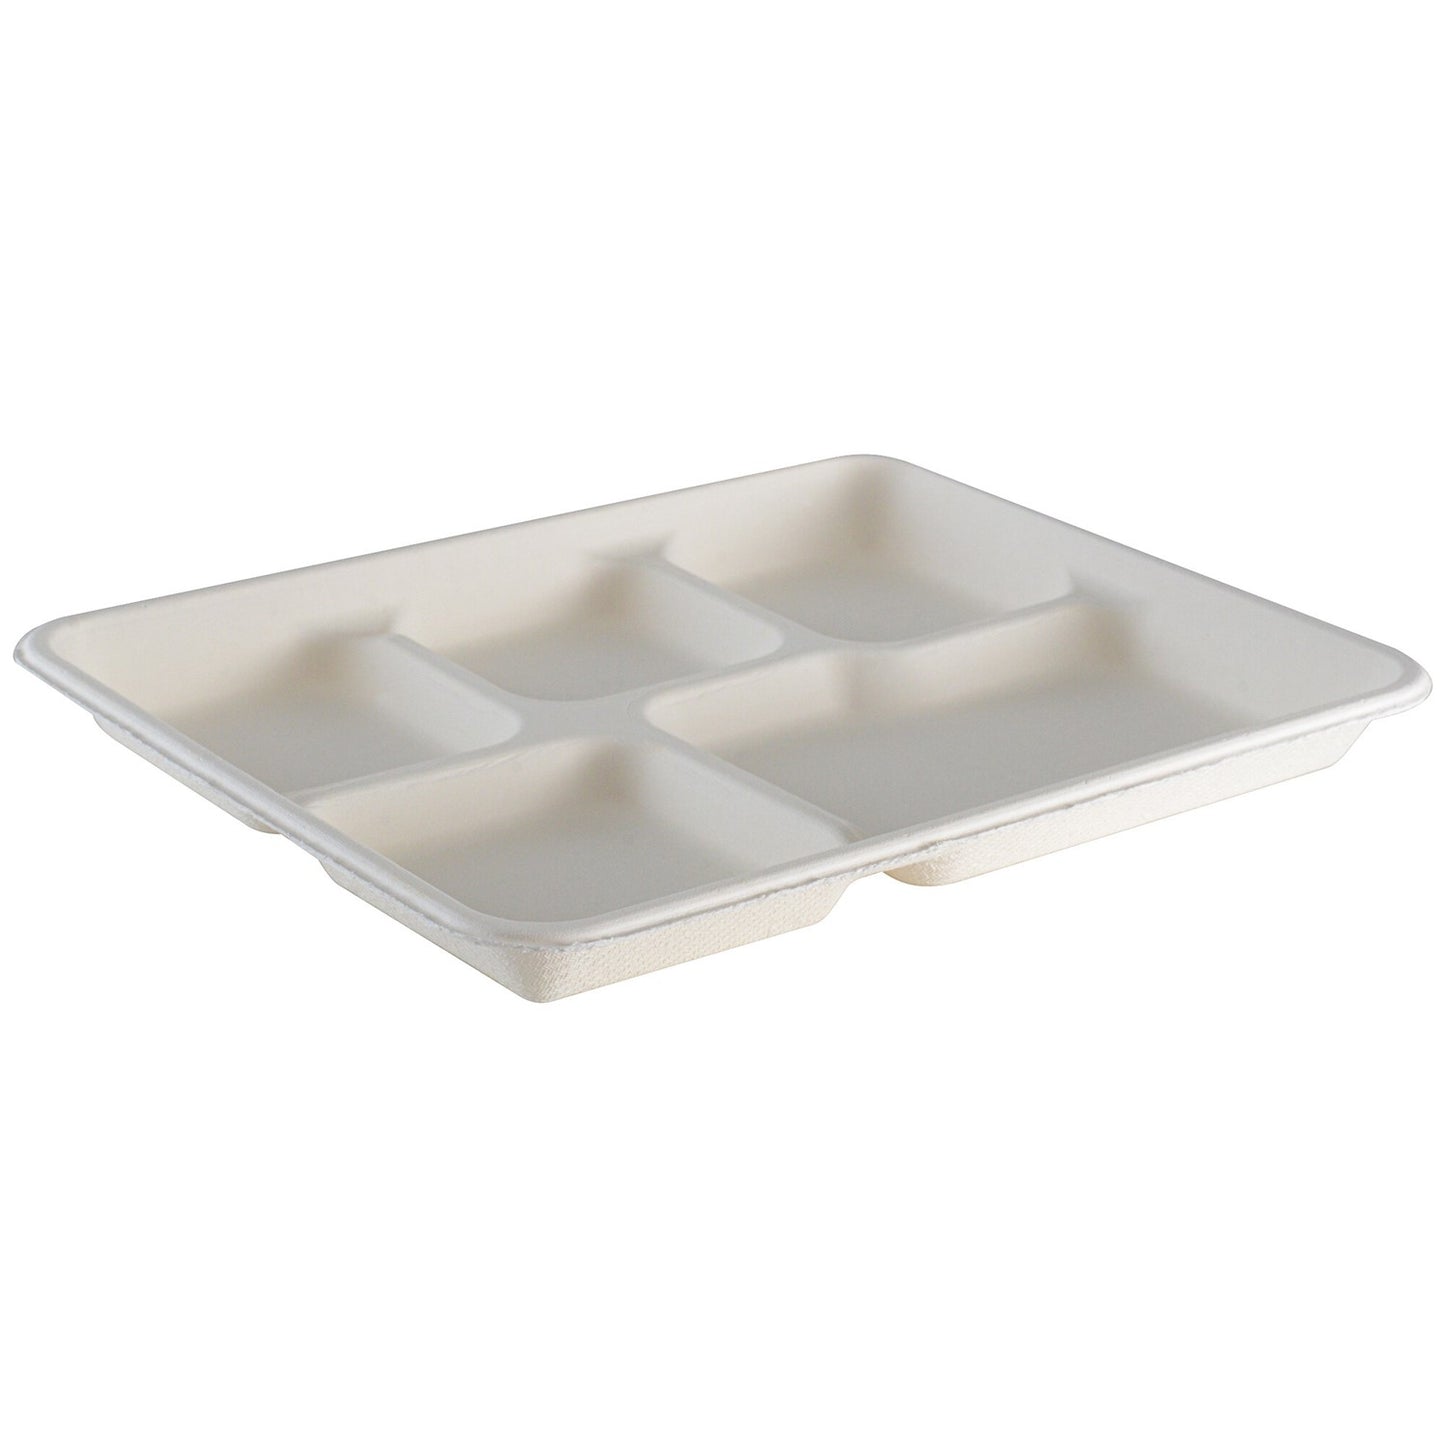 Tray Meal Serving 10" 5 Compartment 10X8 Bagasse Rectangle White 500 Pack